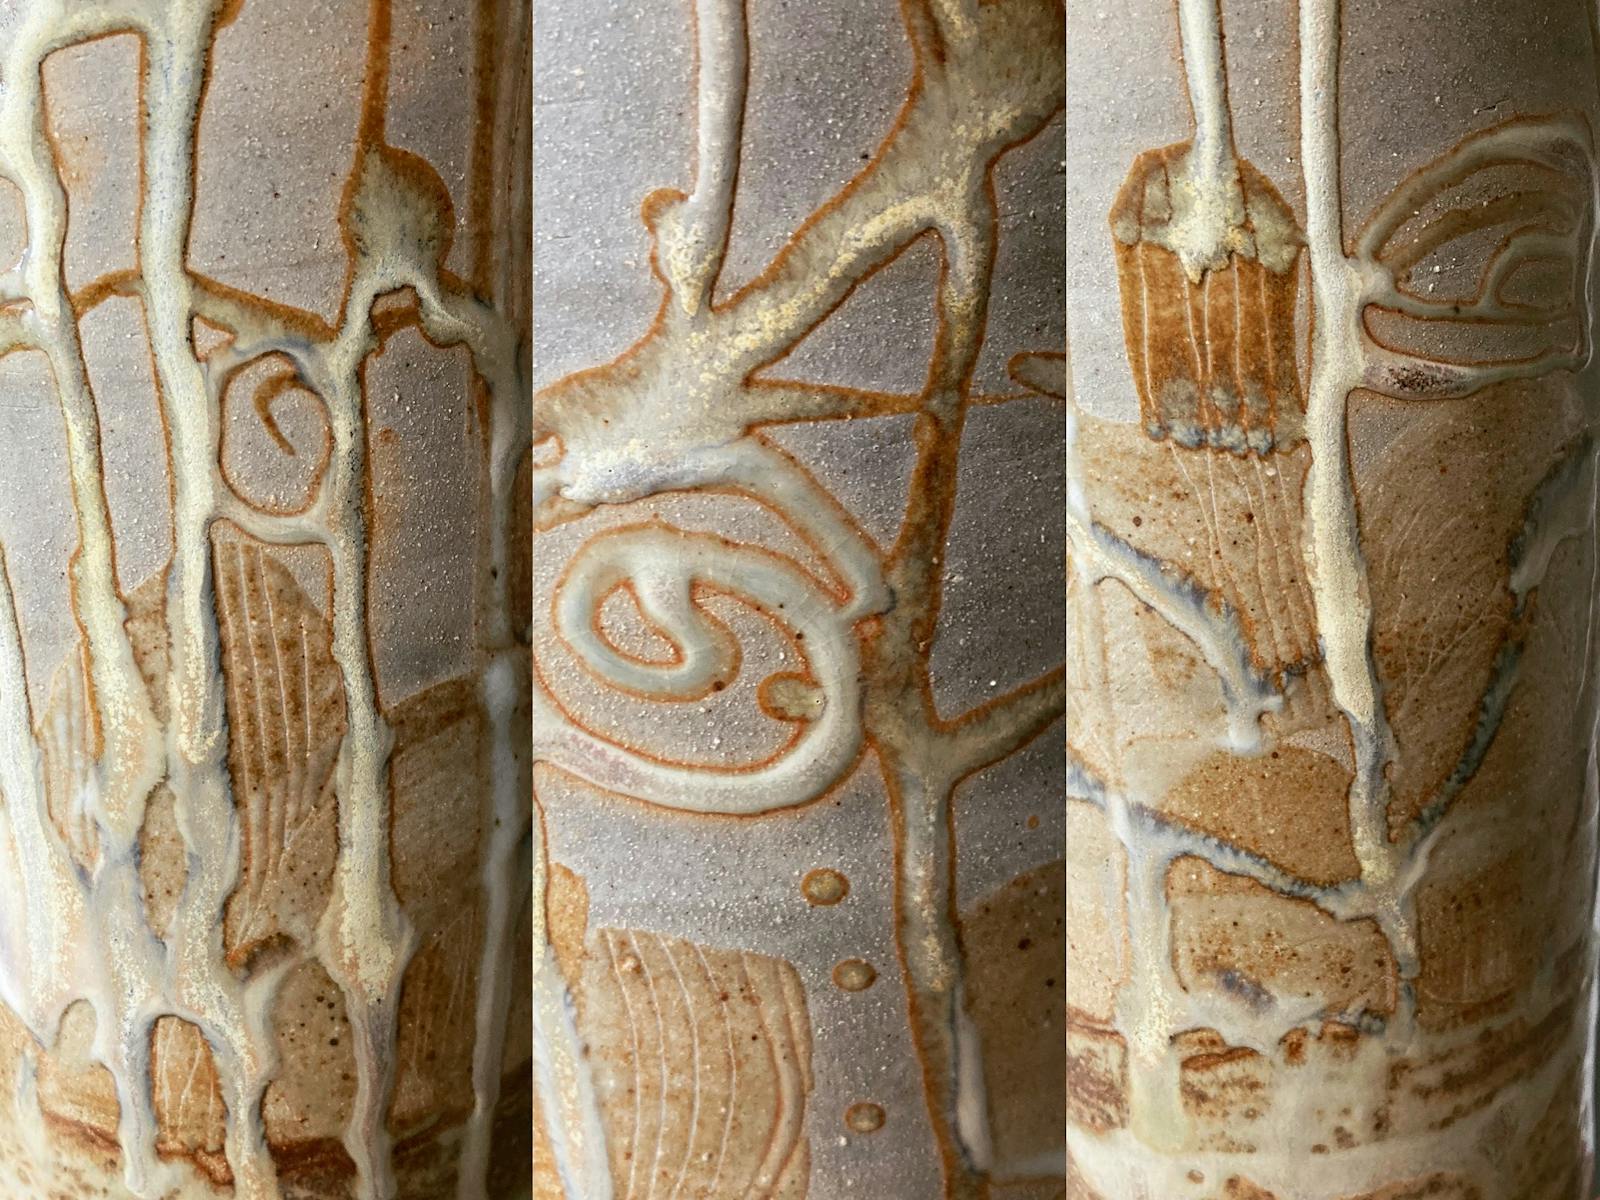 Tall vase detail showing special glaze texture and design.